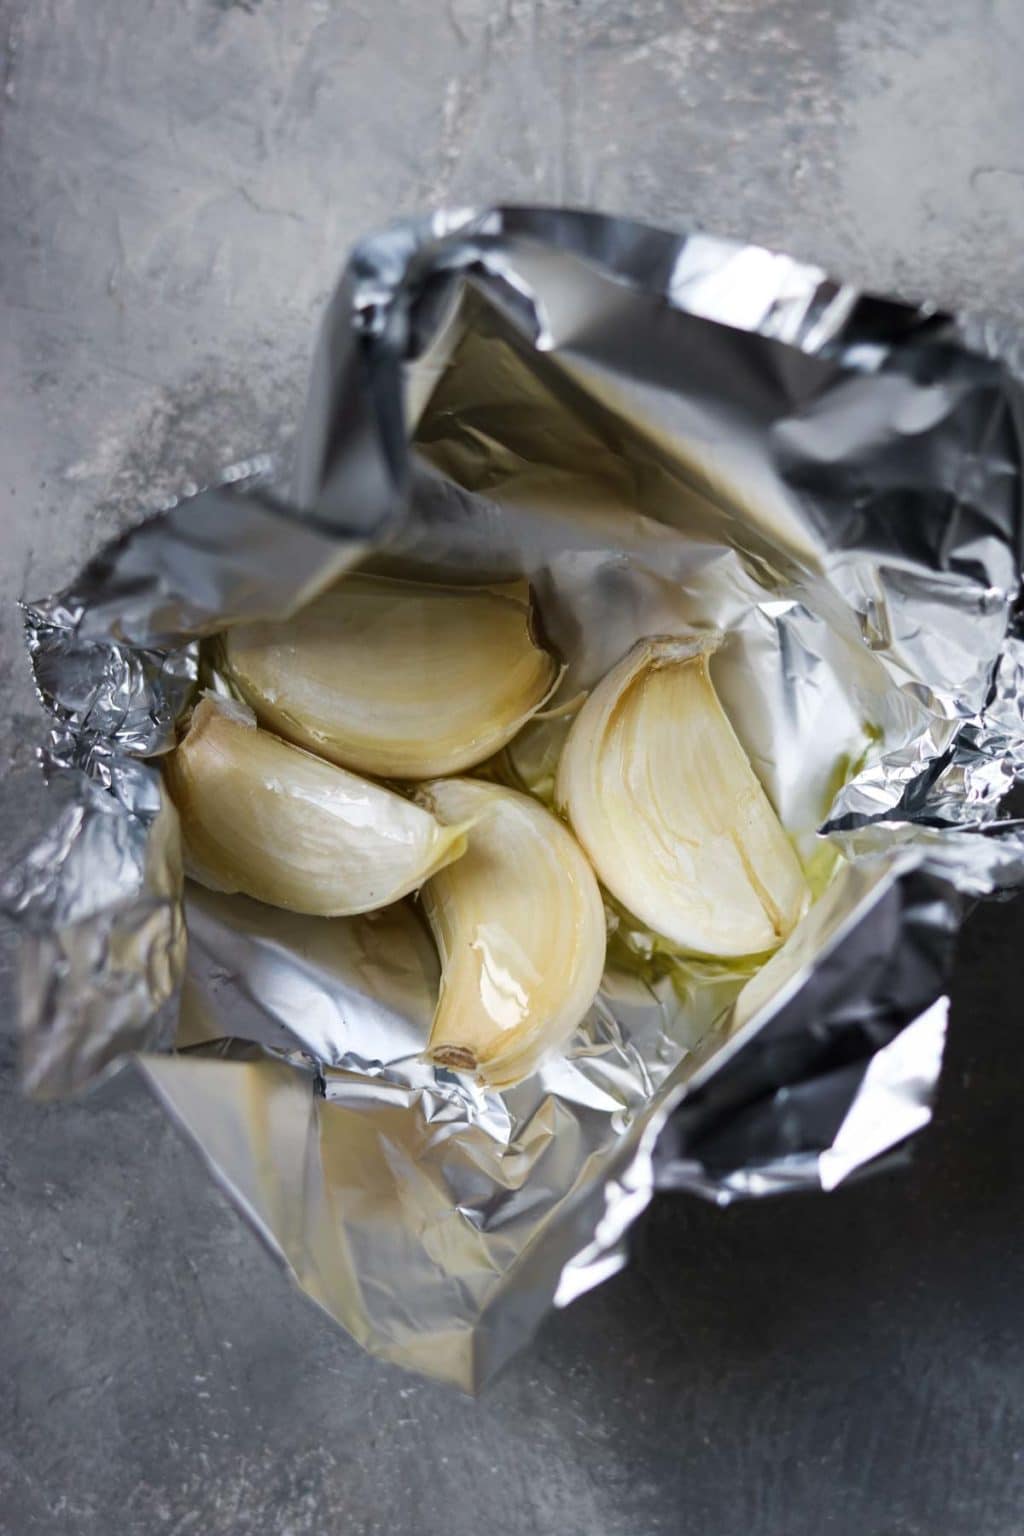 roasted garlic in a foil packet